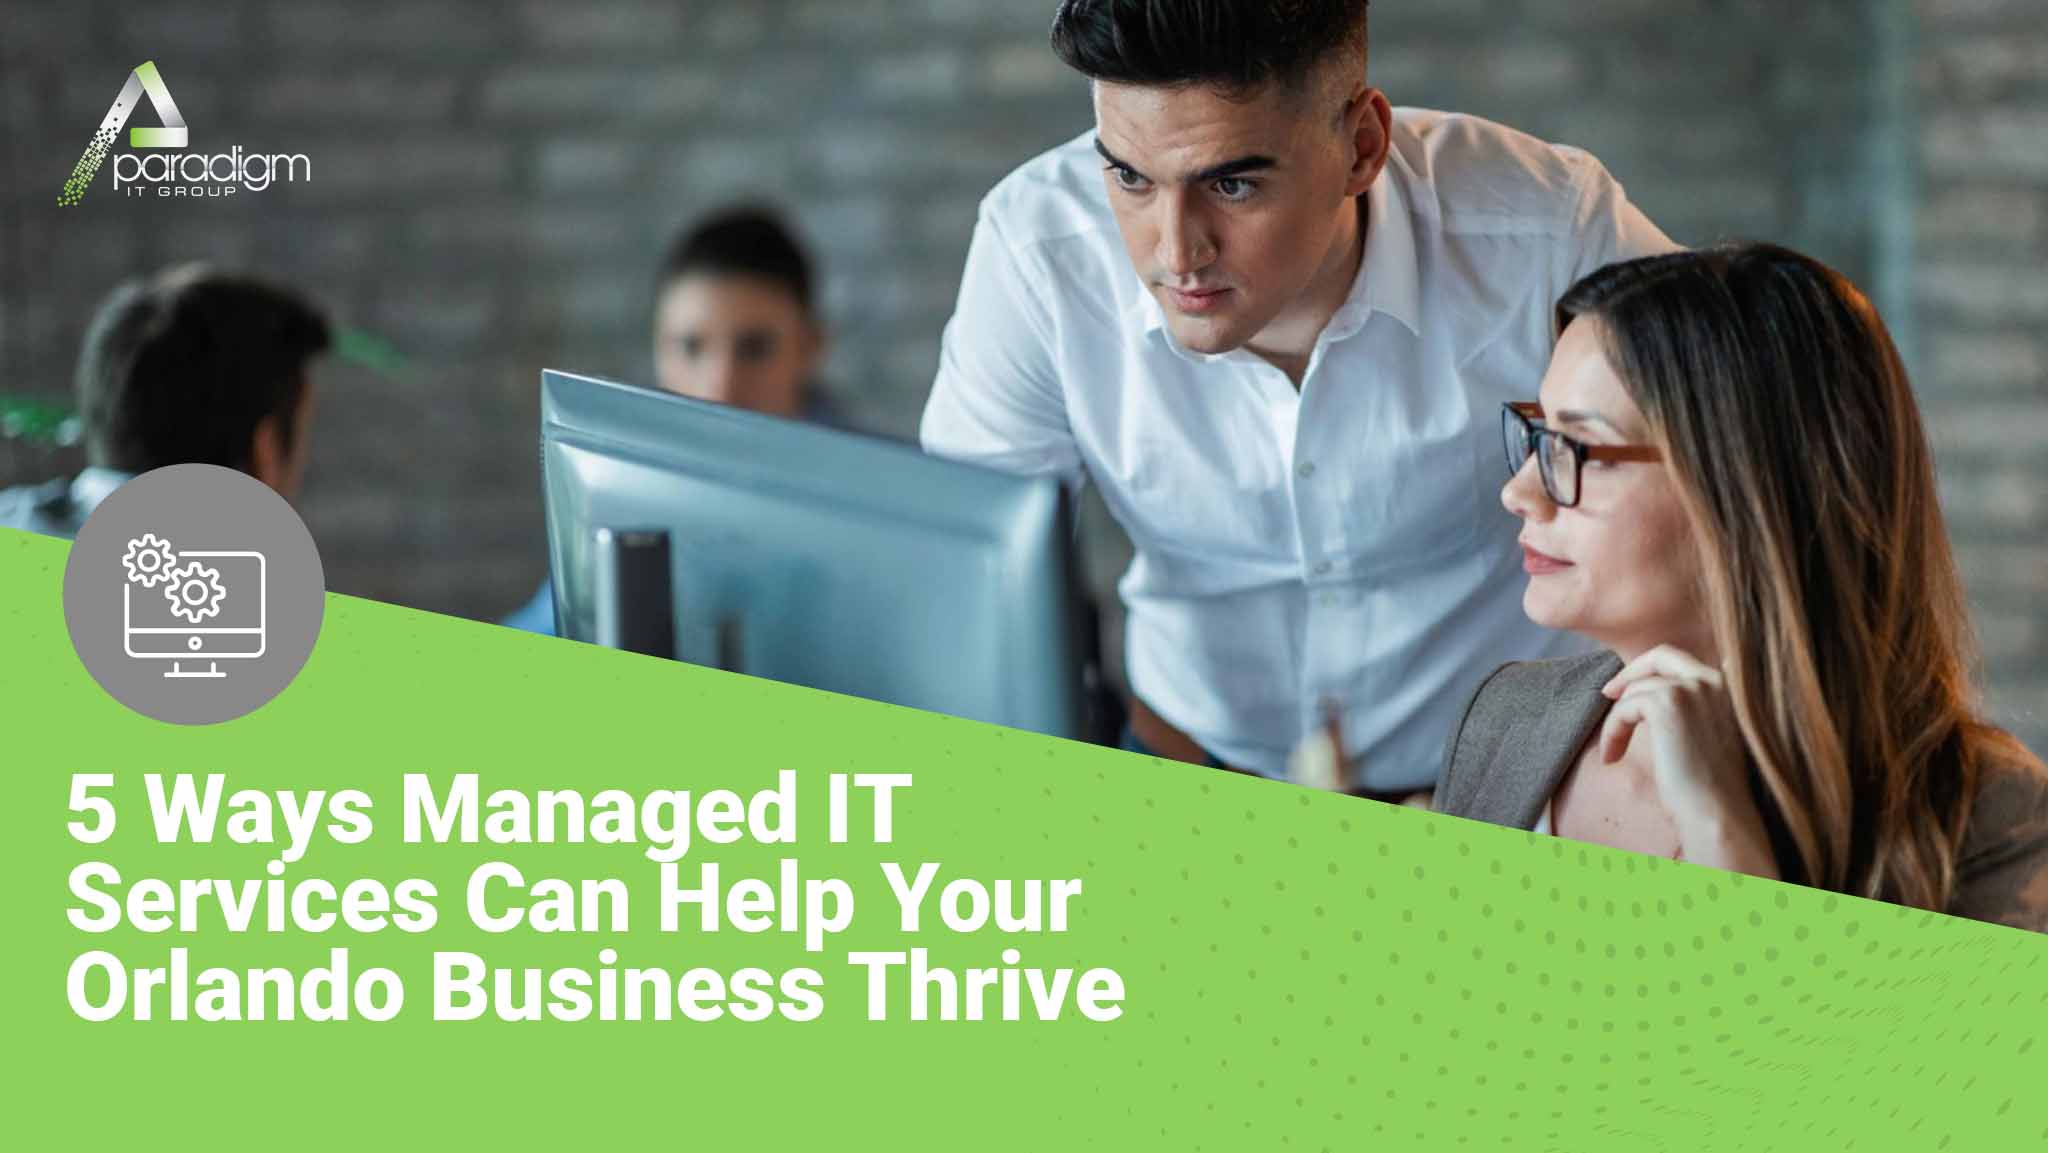 You are currently viewing 5 Ways Managed IT Services Can Help Your Orlando Business Thrive